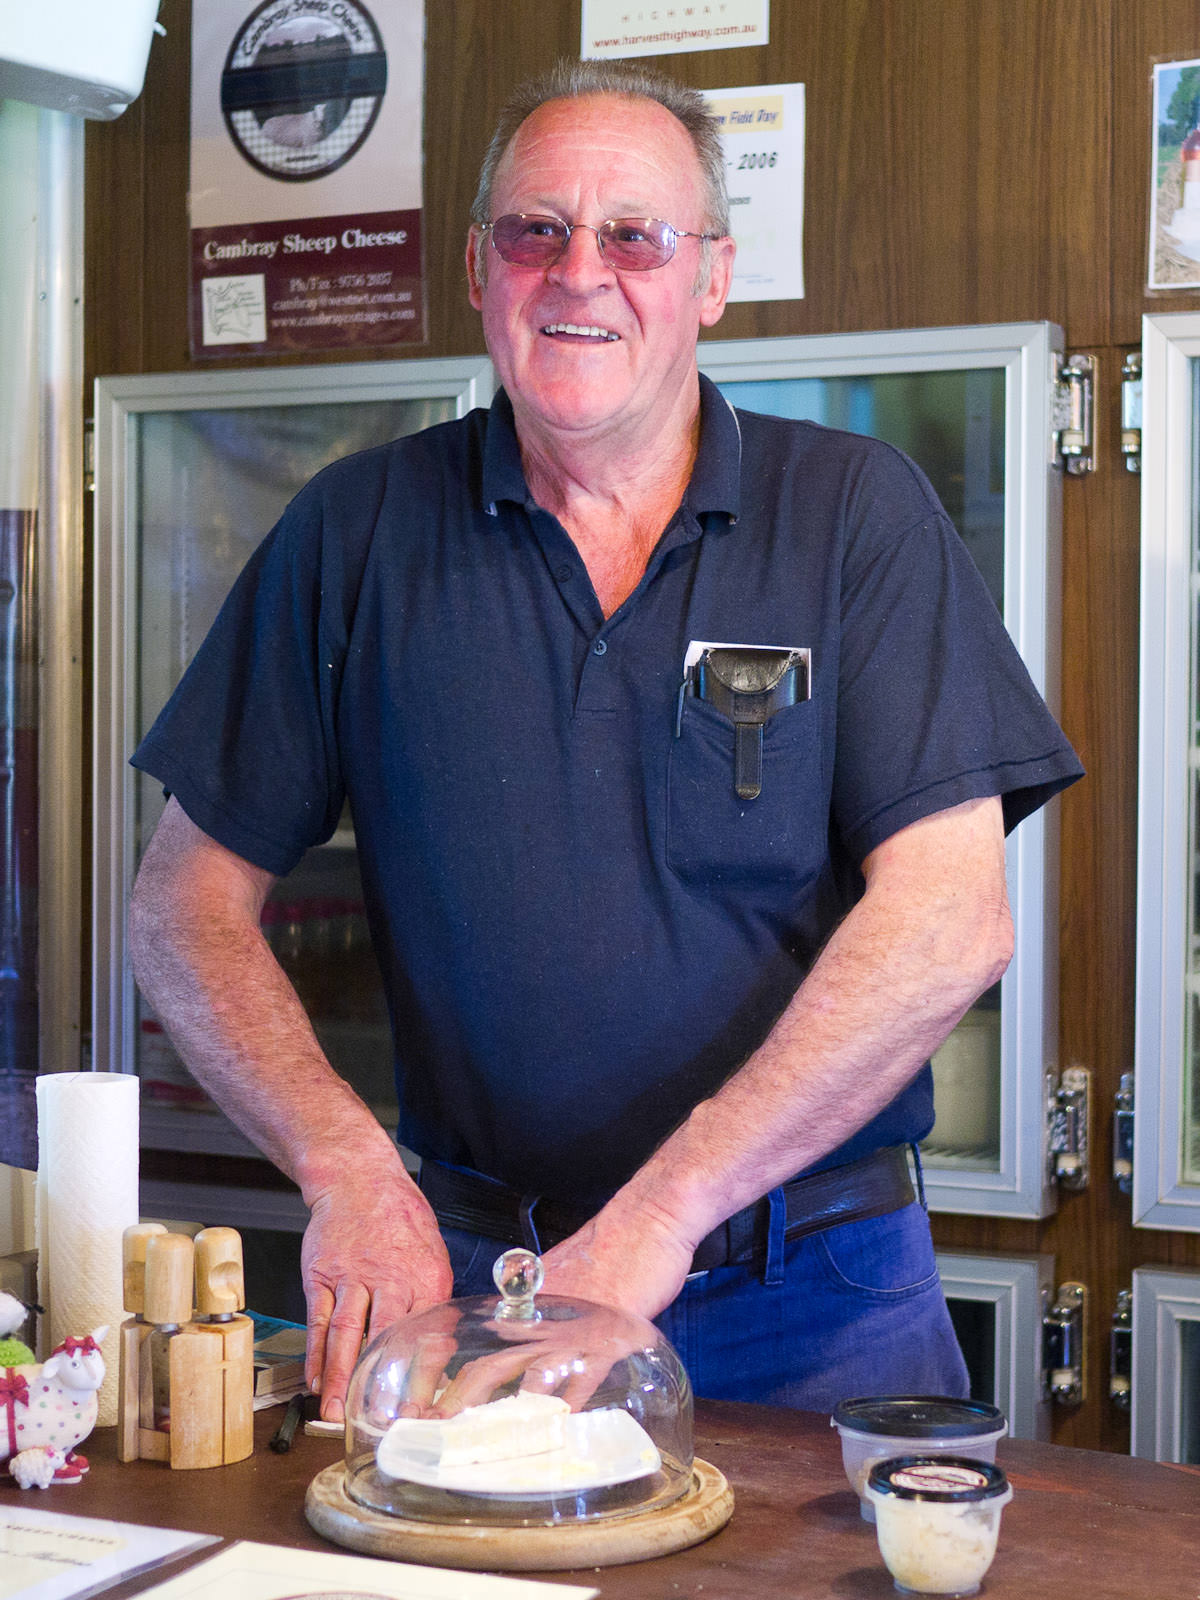 Bruce Wilde talks about Cambray Sheep Cheese